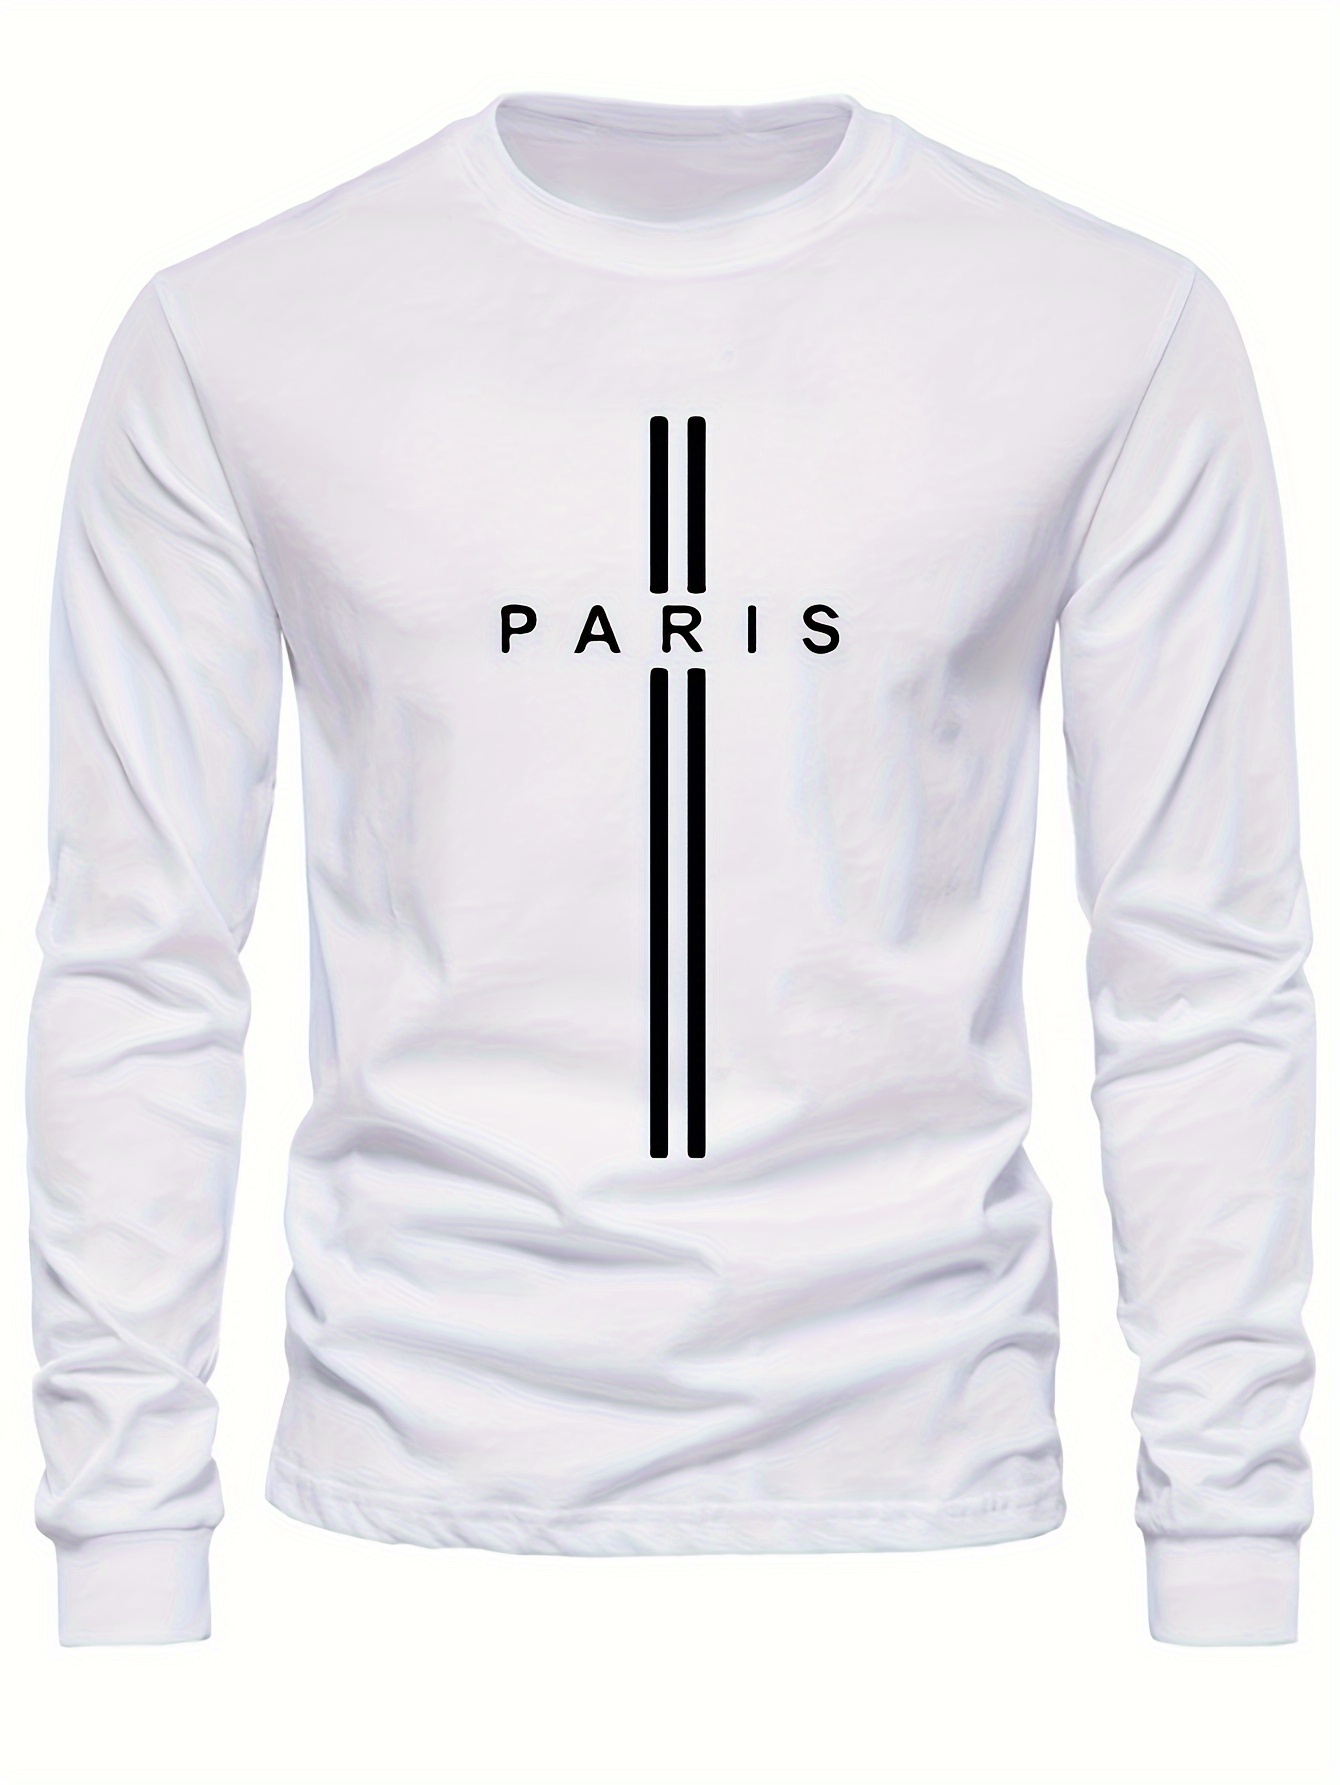 paris print mens graphic design crew neck long sleeve active t shirt tee casual comfy shirts for spring summer autumn mens clothing tops details 6